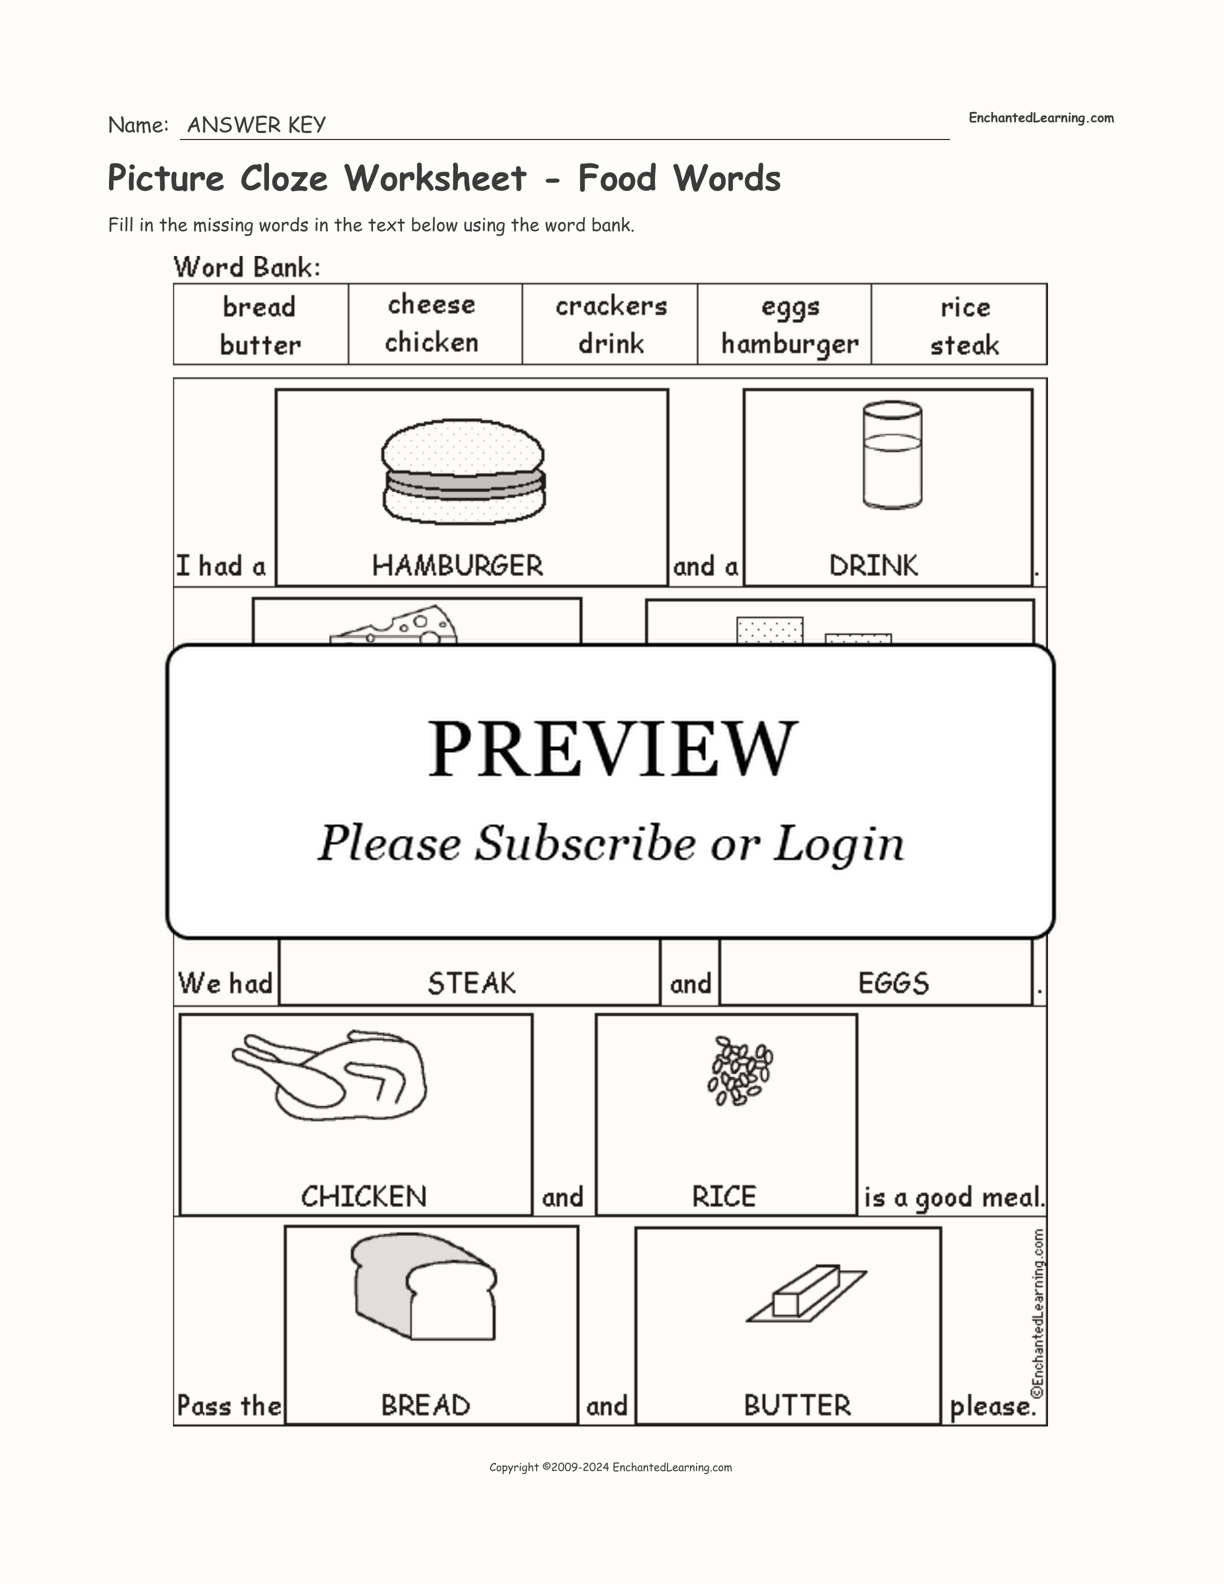 Picture Cloze Worksheet - Food Words interactive worksheet page 2